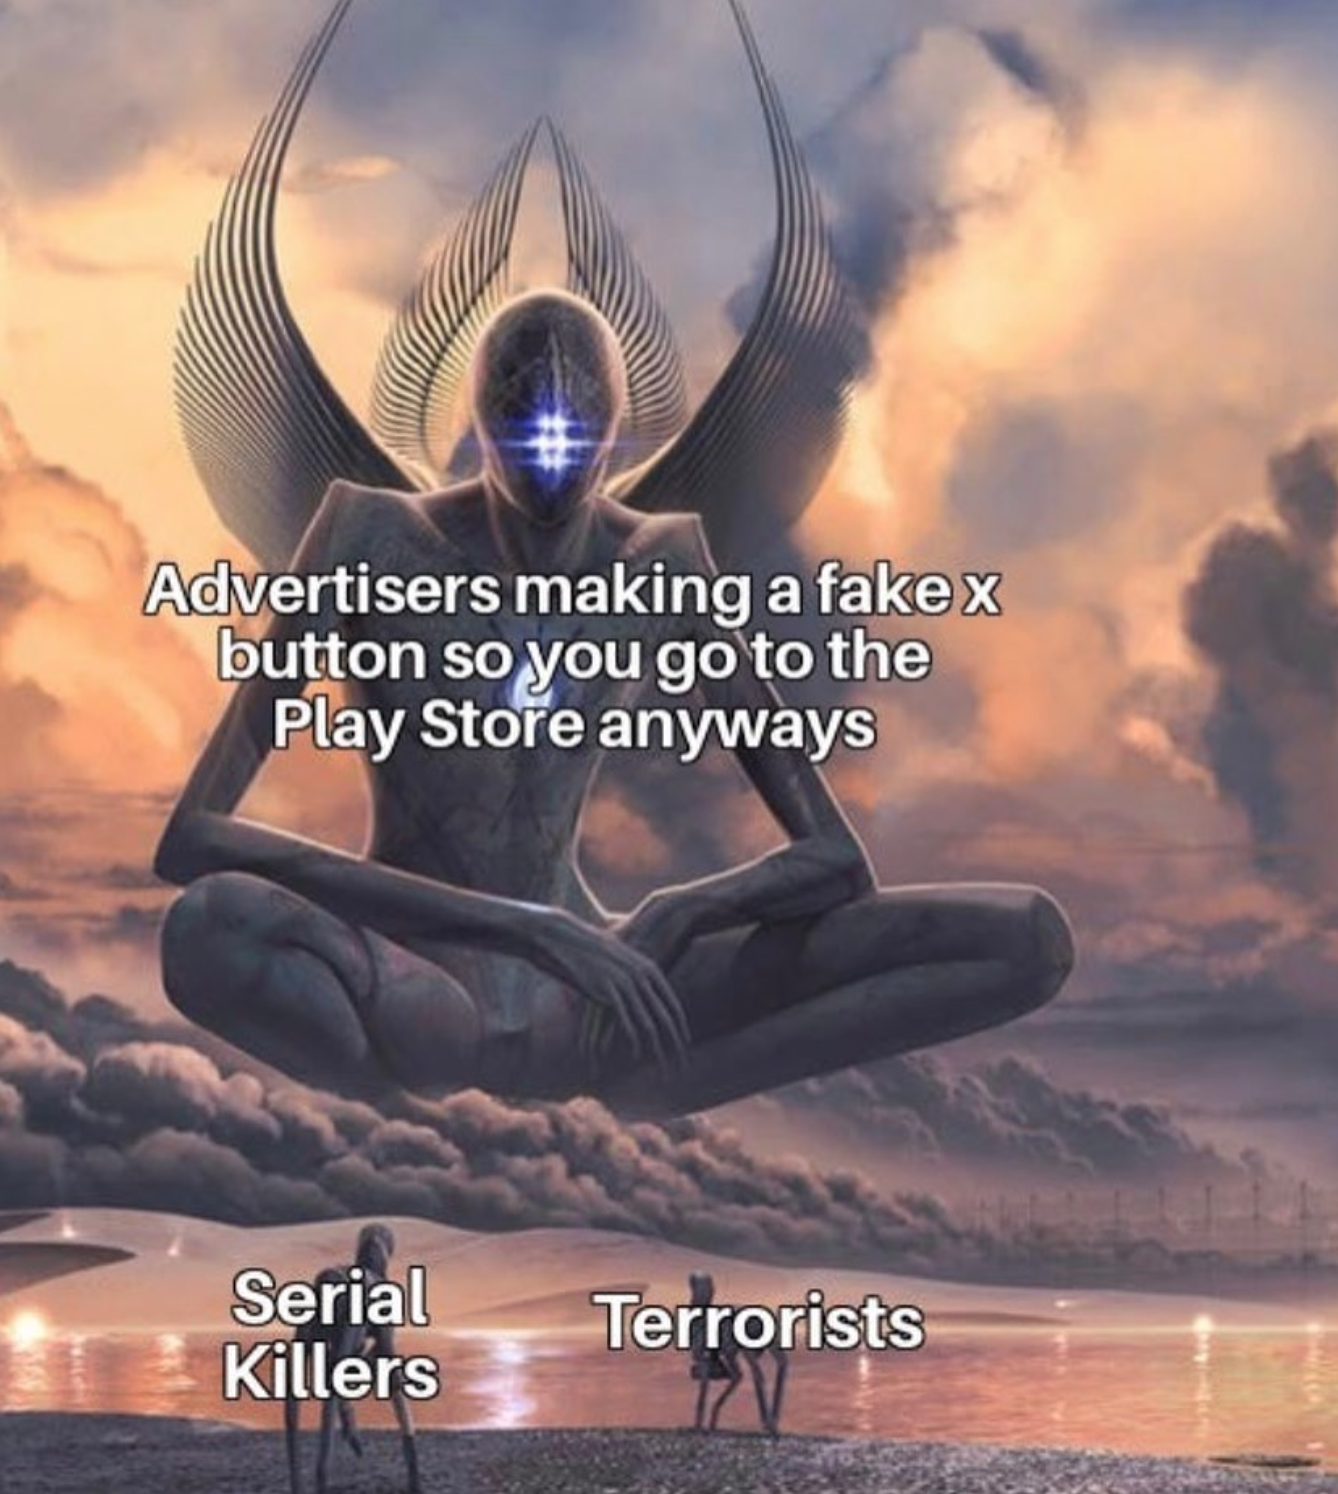 funny gaming memes - god meme templates - Advertisers making a fakex button so you go to the Play Store anyways Serial Killers Terrorists